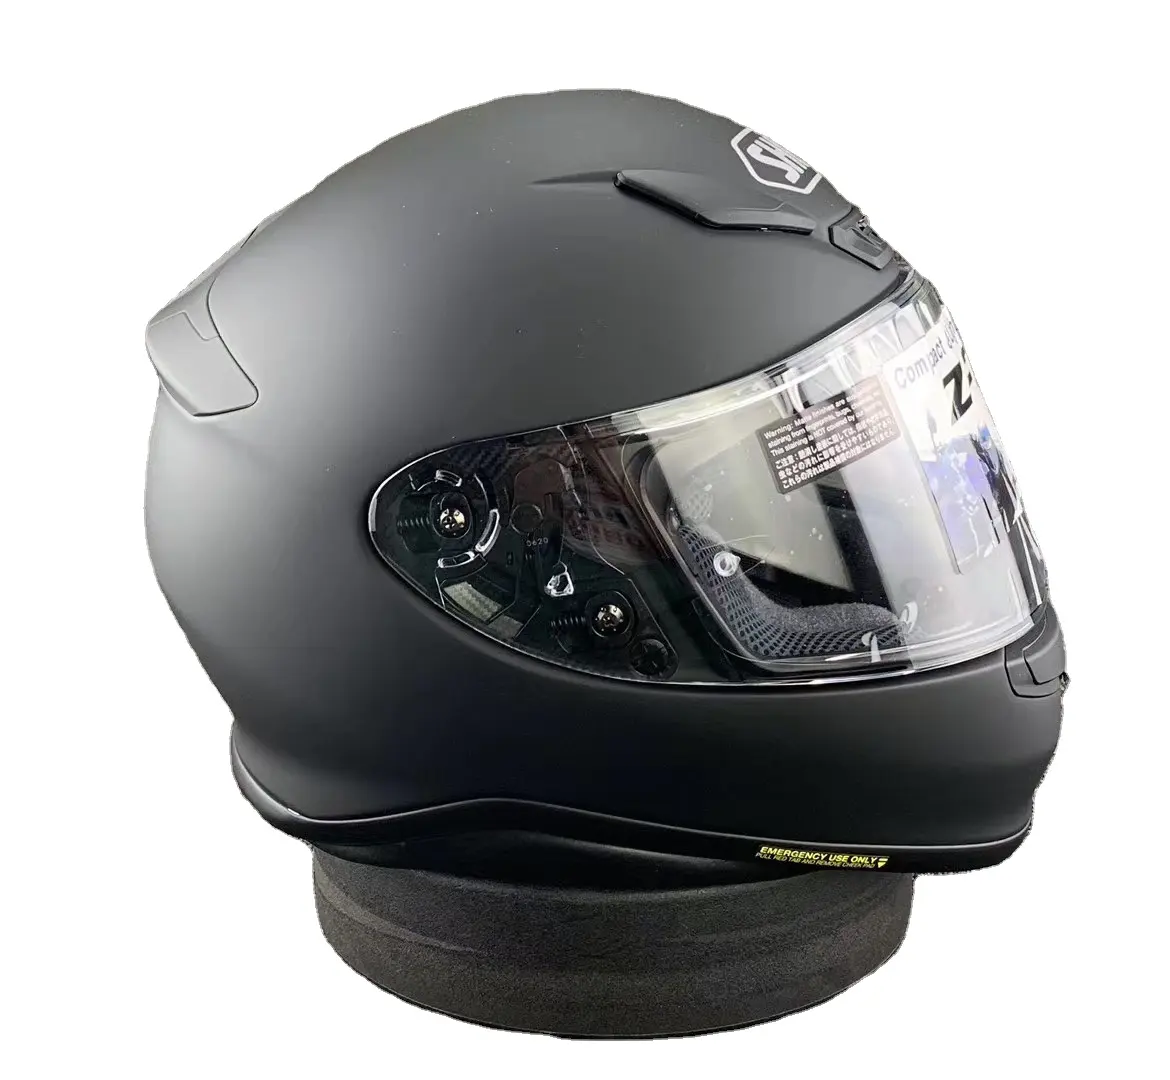 Two Pieces Include Full-face Motorcycle Helmets And Matte Black Helmets For Off-road Motorcycle Racing Helmets